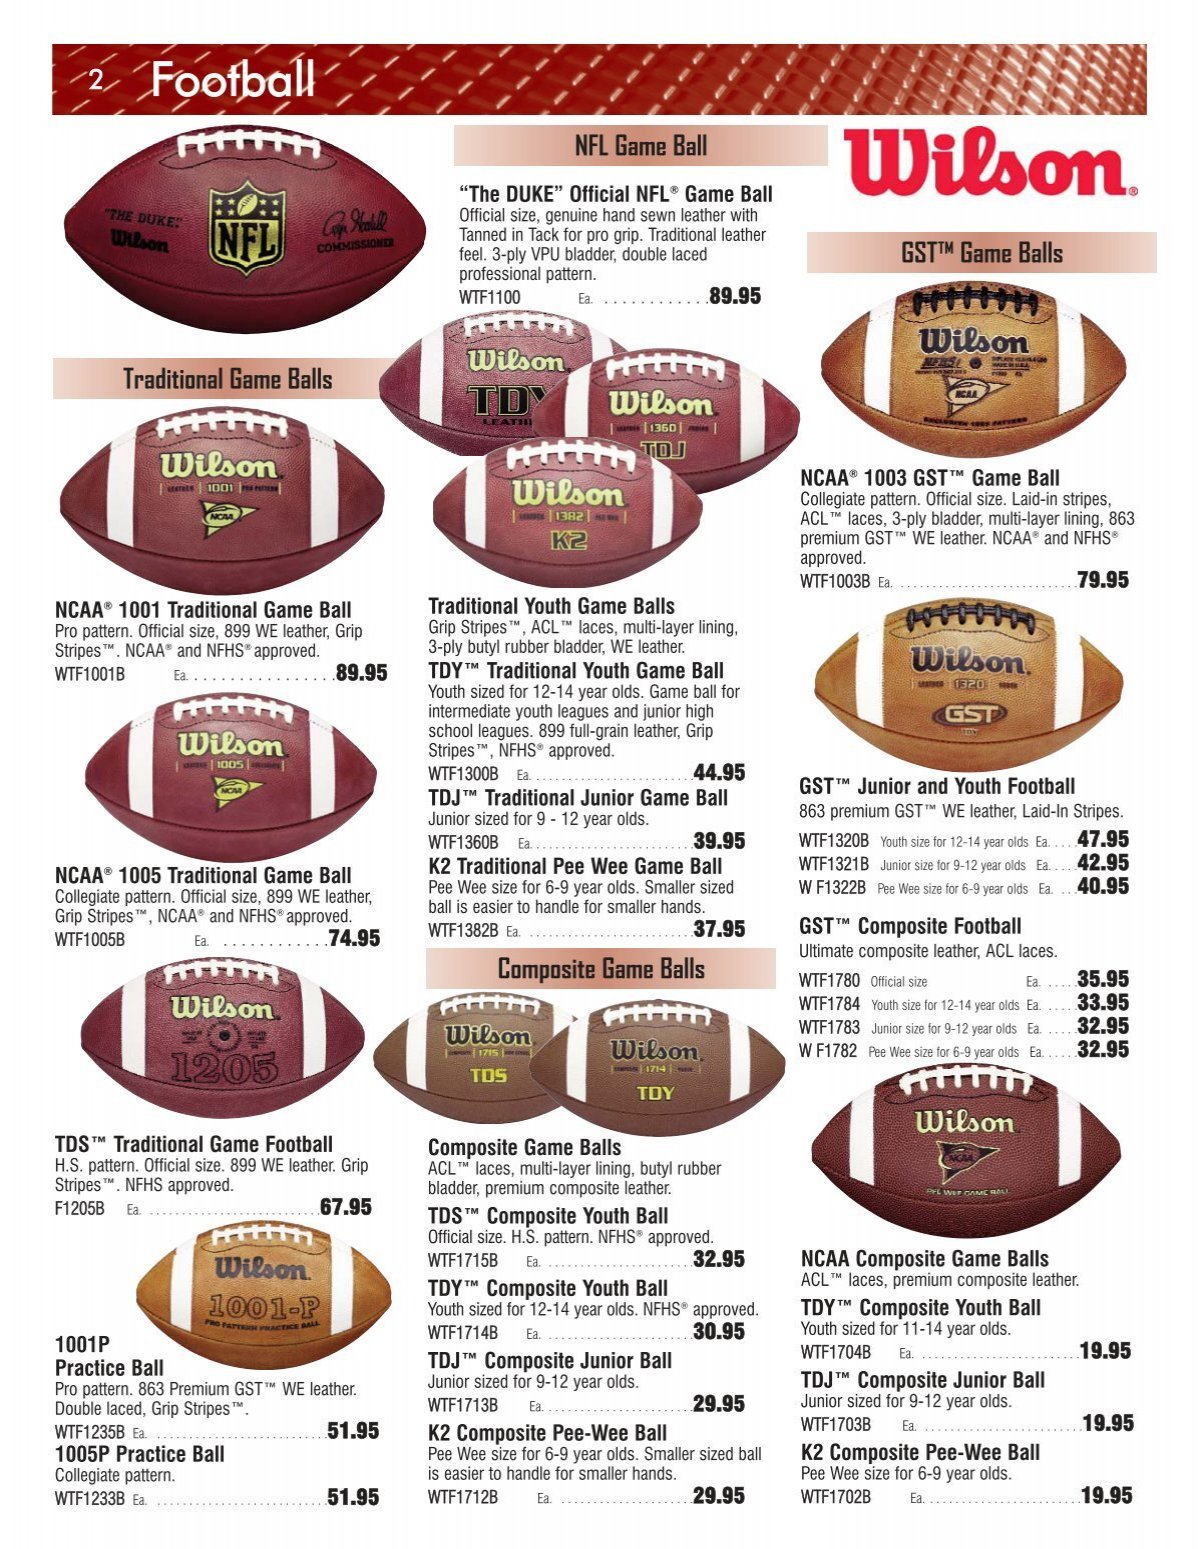 2010 Football Section_Layout 1 - Cummins Athletic Supply